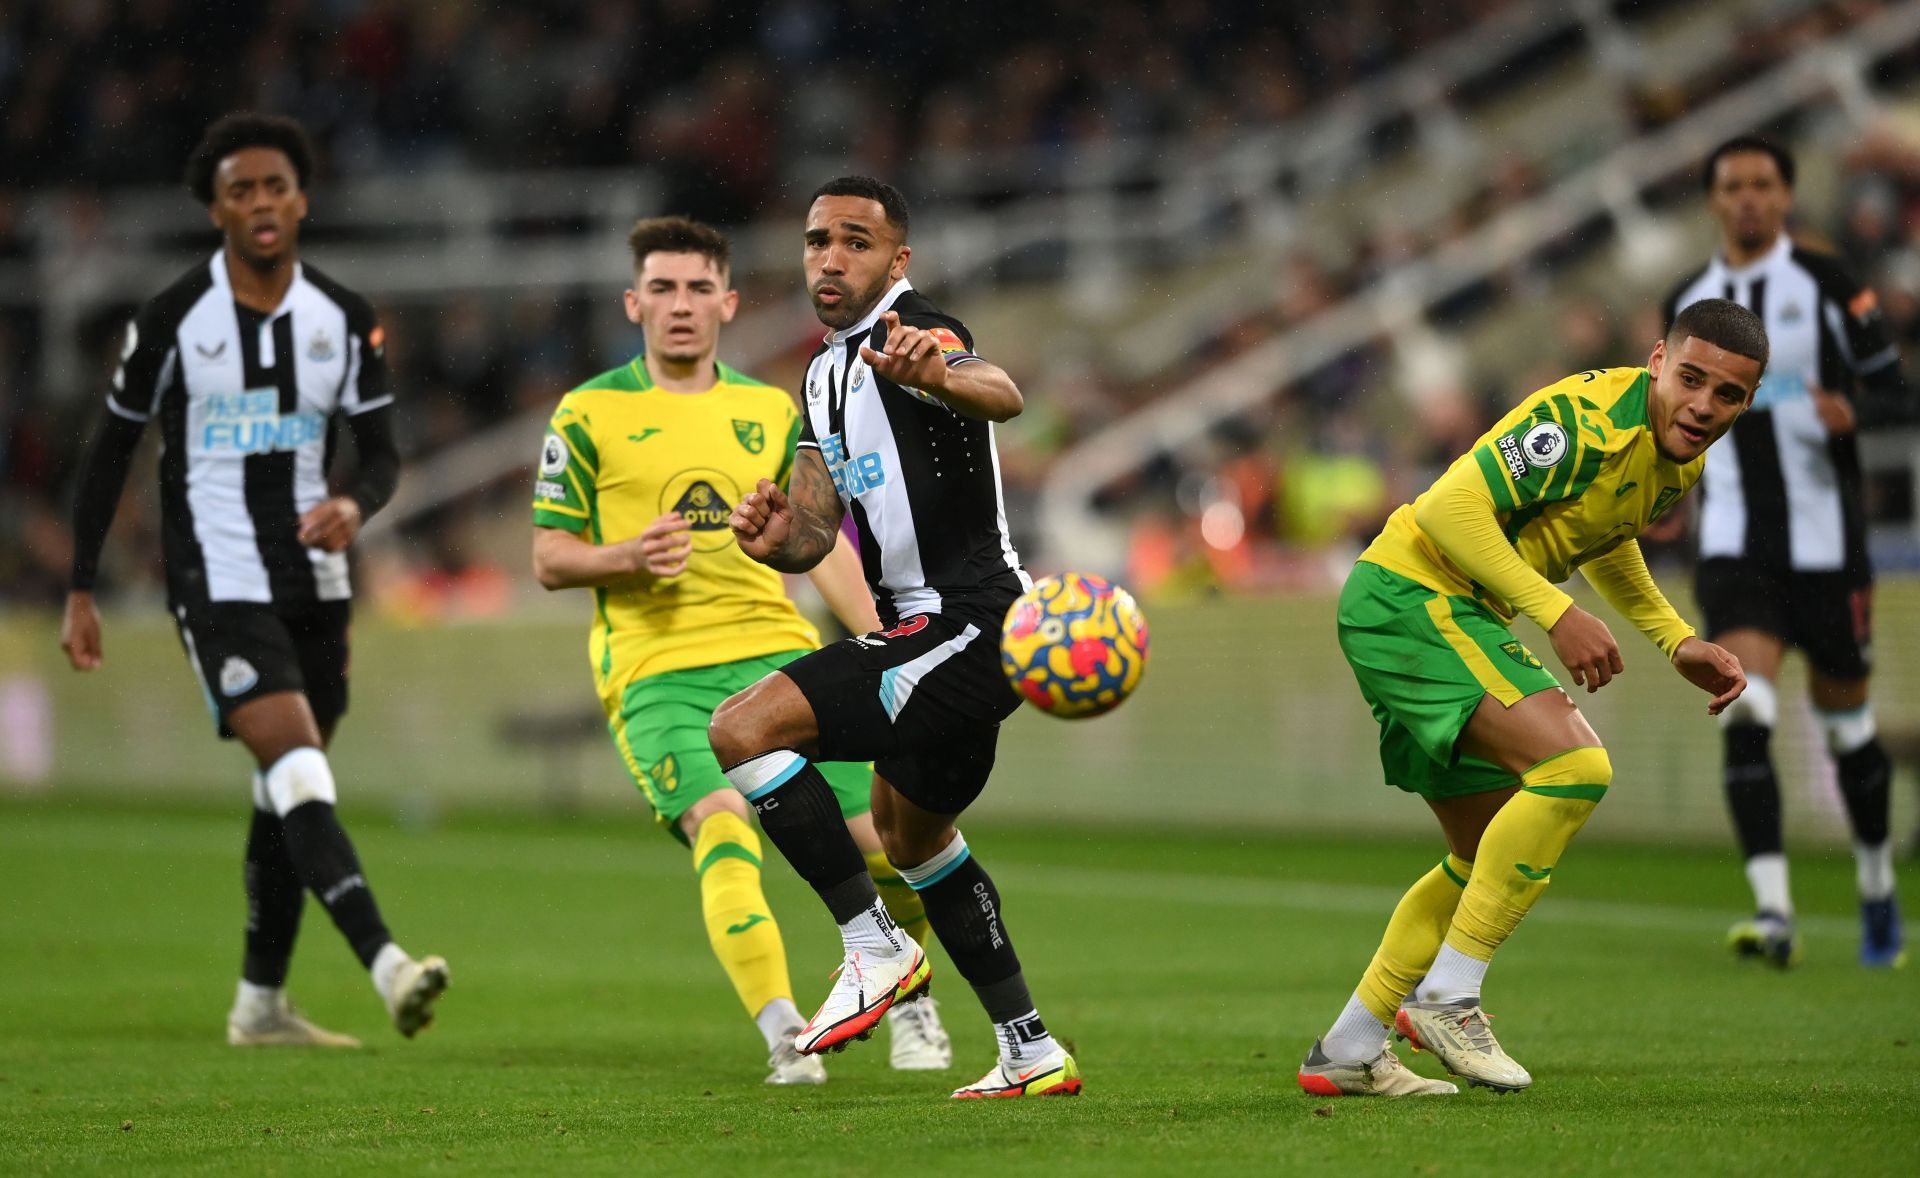 Norwich City will host Newcastle United on Saturday as they look to return to winning ways.